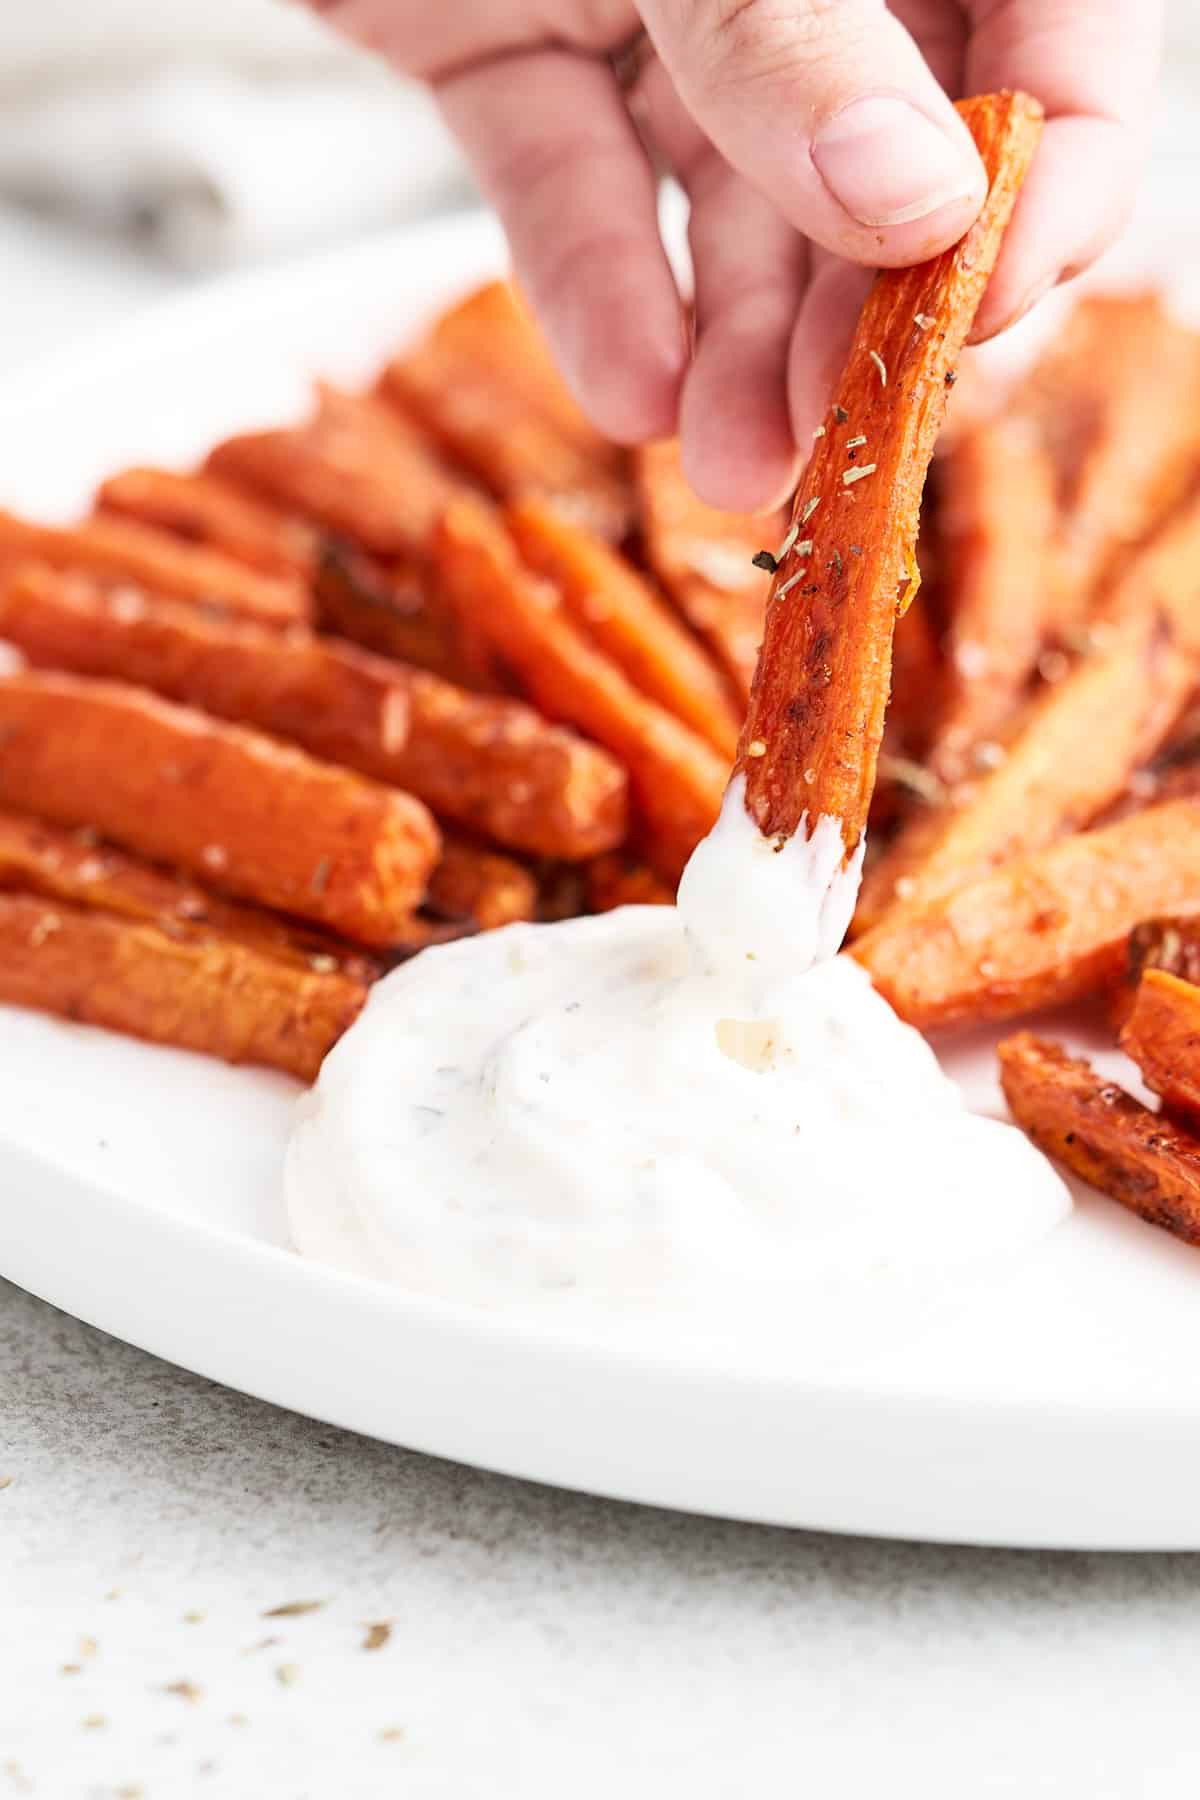 Dipping a carrot fry.